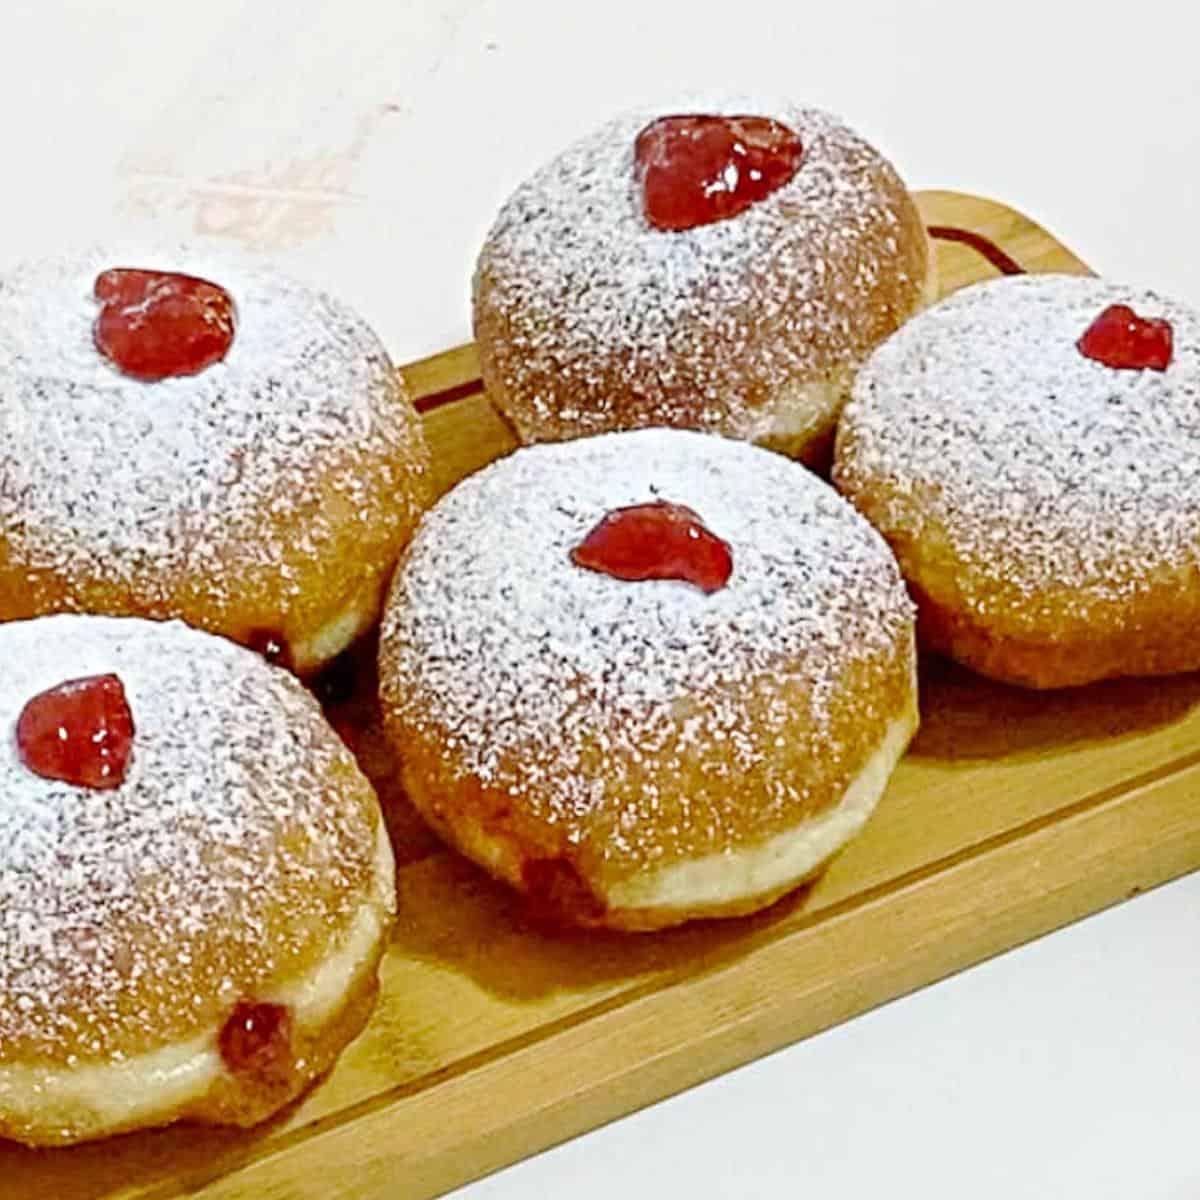 Donuts with jelly on a wooden board.